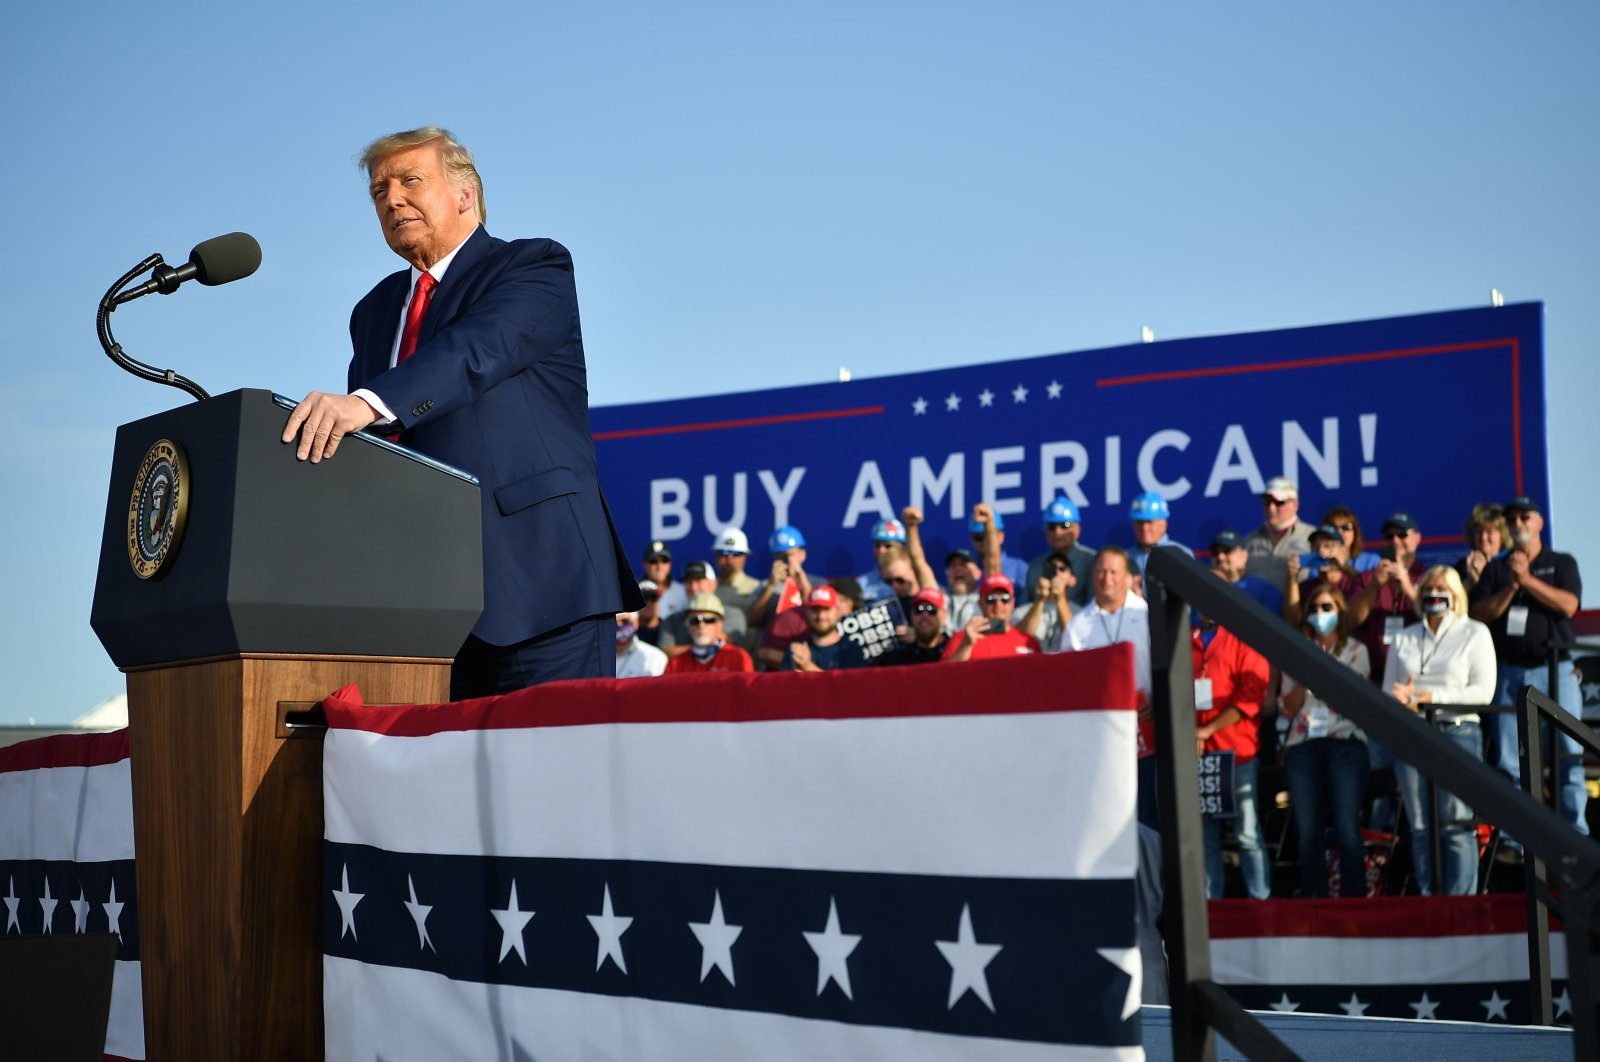 U.S. President Donald Trump speaks during a rally at Dayton International Airport in Dayton, Ohio Sept. 21, 2020. (AFP Photo)